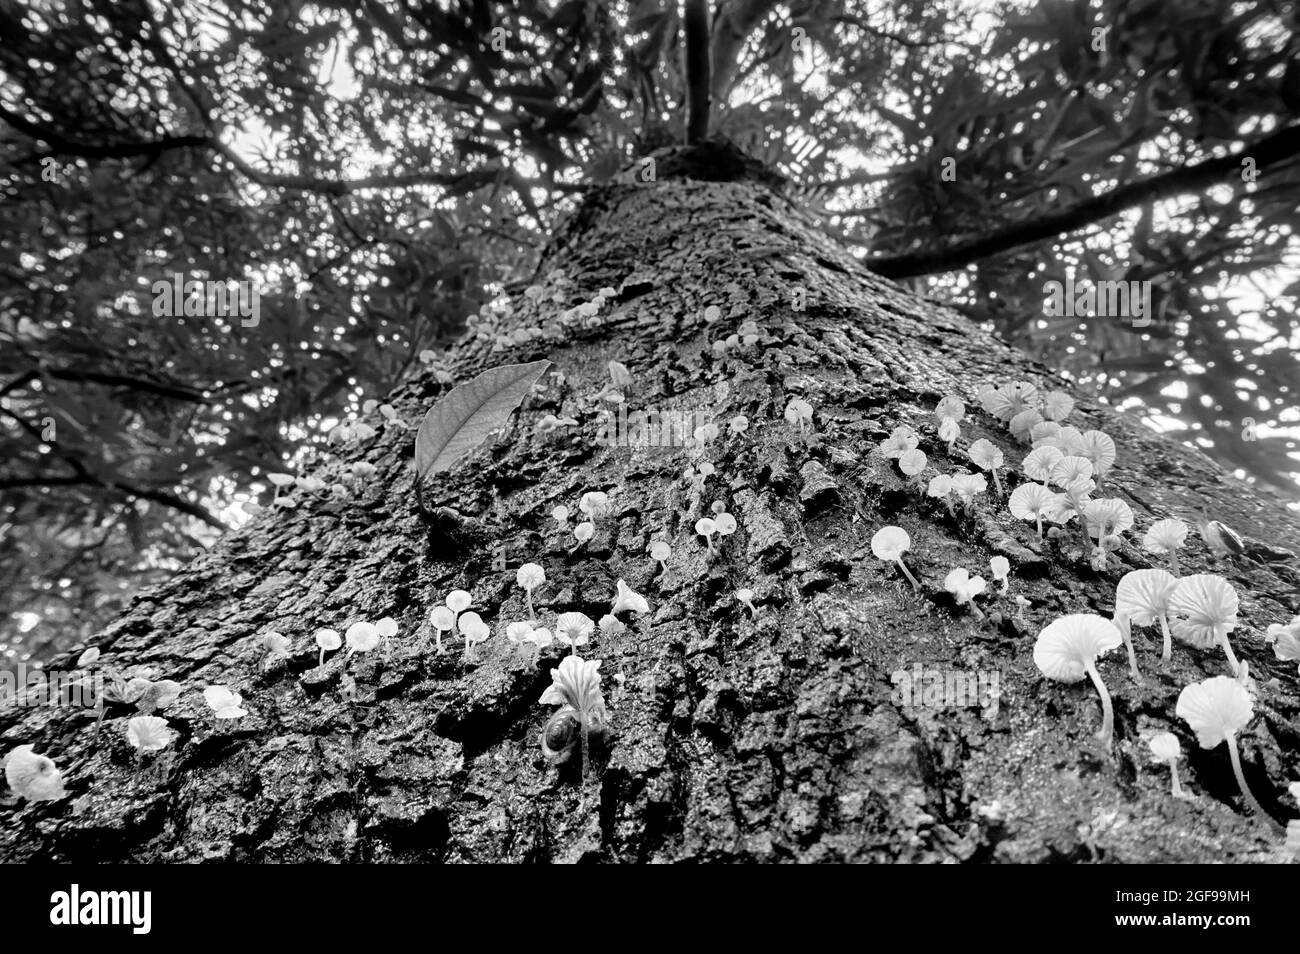 Black and white image of fungus grown on a tree. Image shot from low angle to the top of tree for creative use as nature background and copyspace. Stock Photo